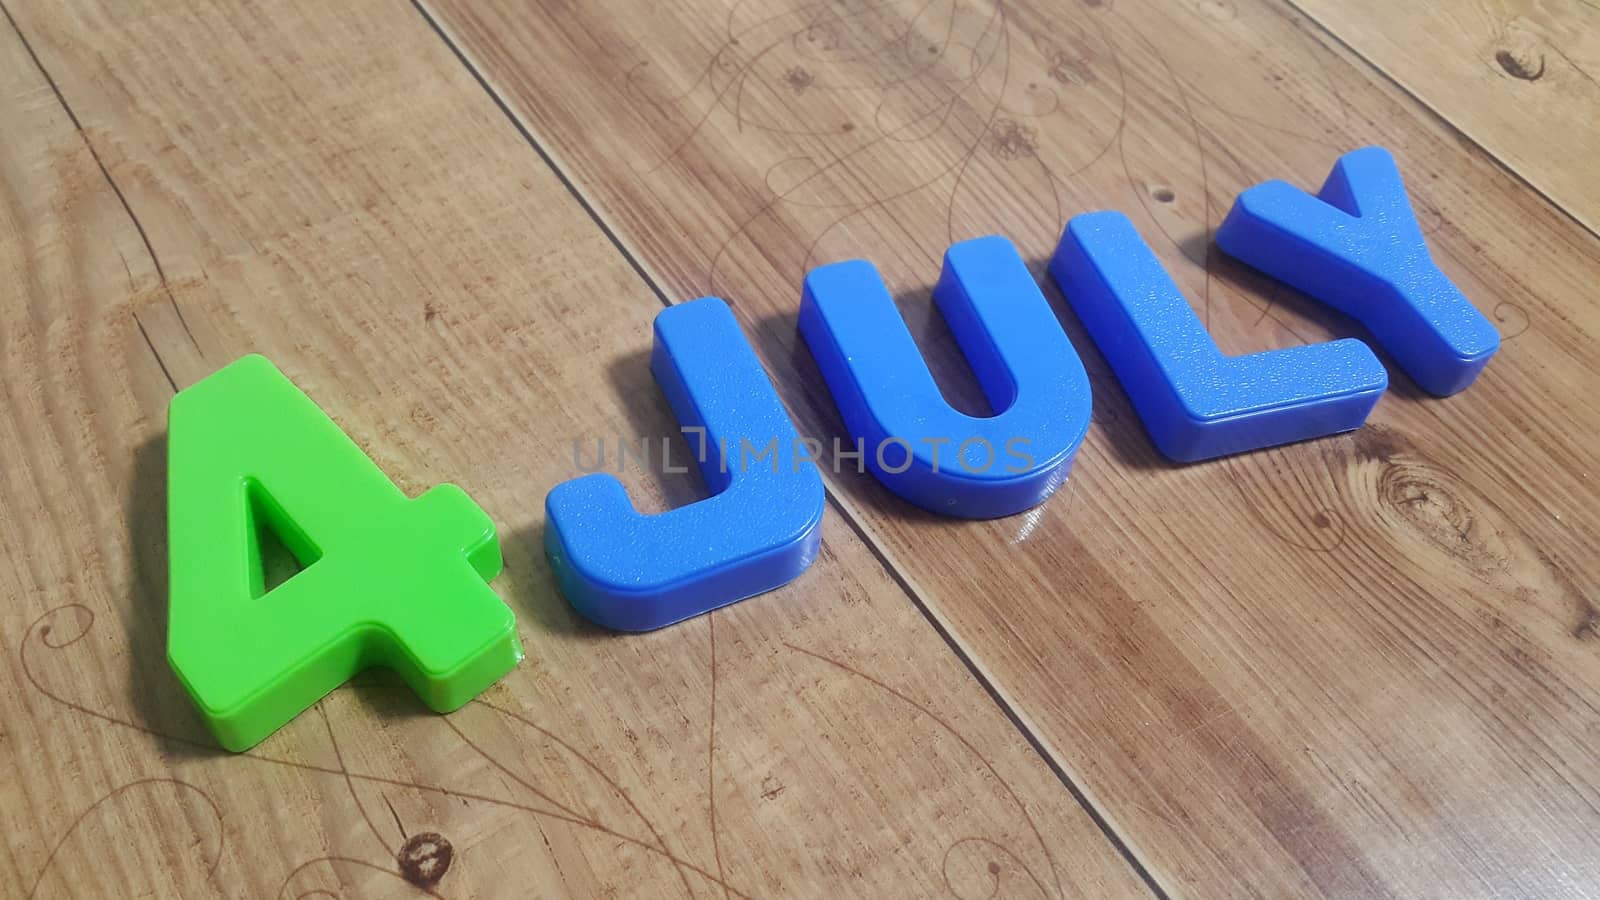 Plastic colored alphabets making words 4 july are placed on a wooden floor. These plastic letters can be used for teaching kids.